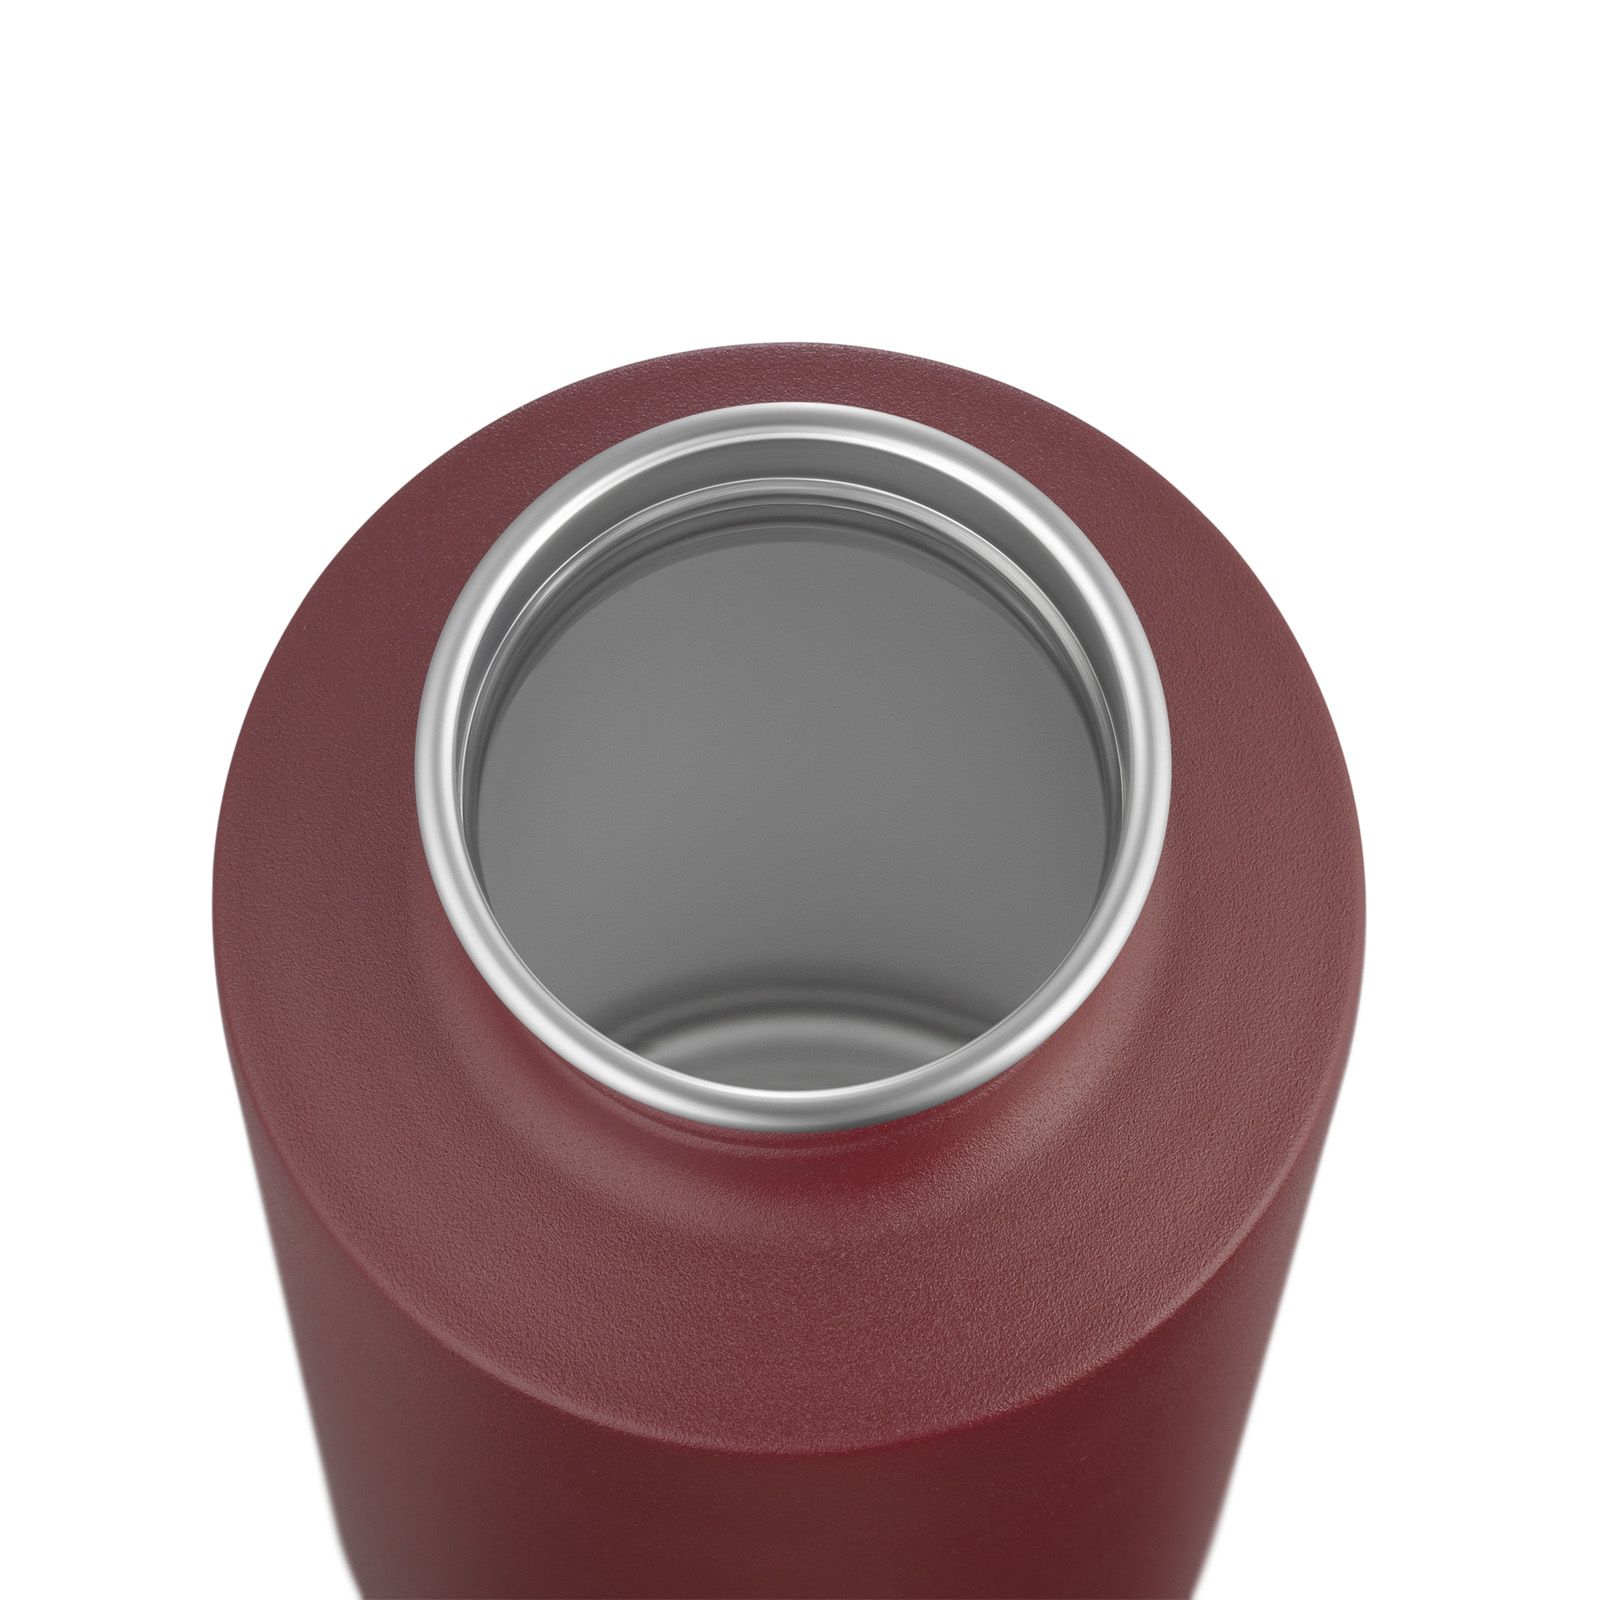 Sculptor Stainless Steel Drink 1L Burgundy Red, Buy Sculptor Stainless  Steel Drink 1L Burgundy Red here